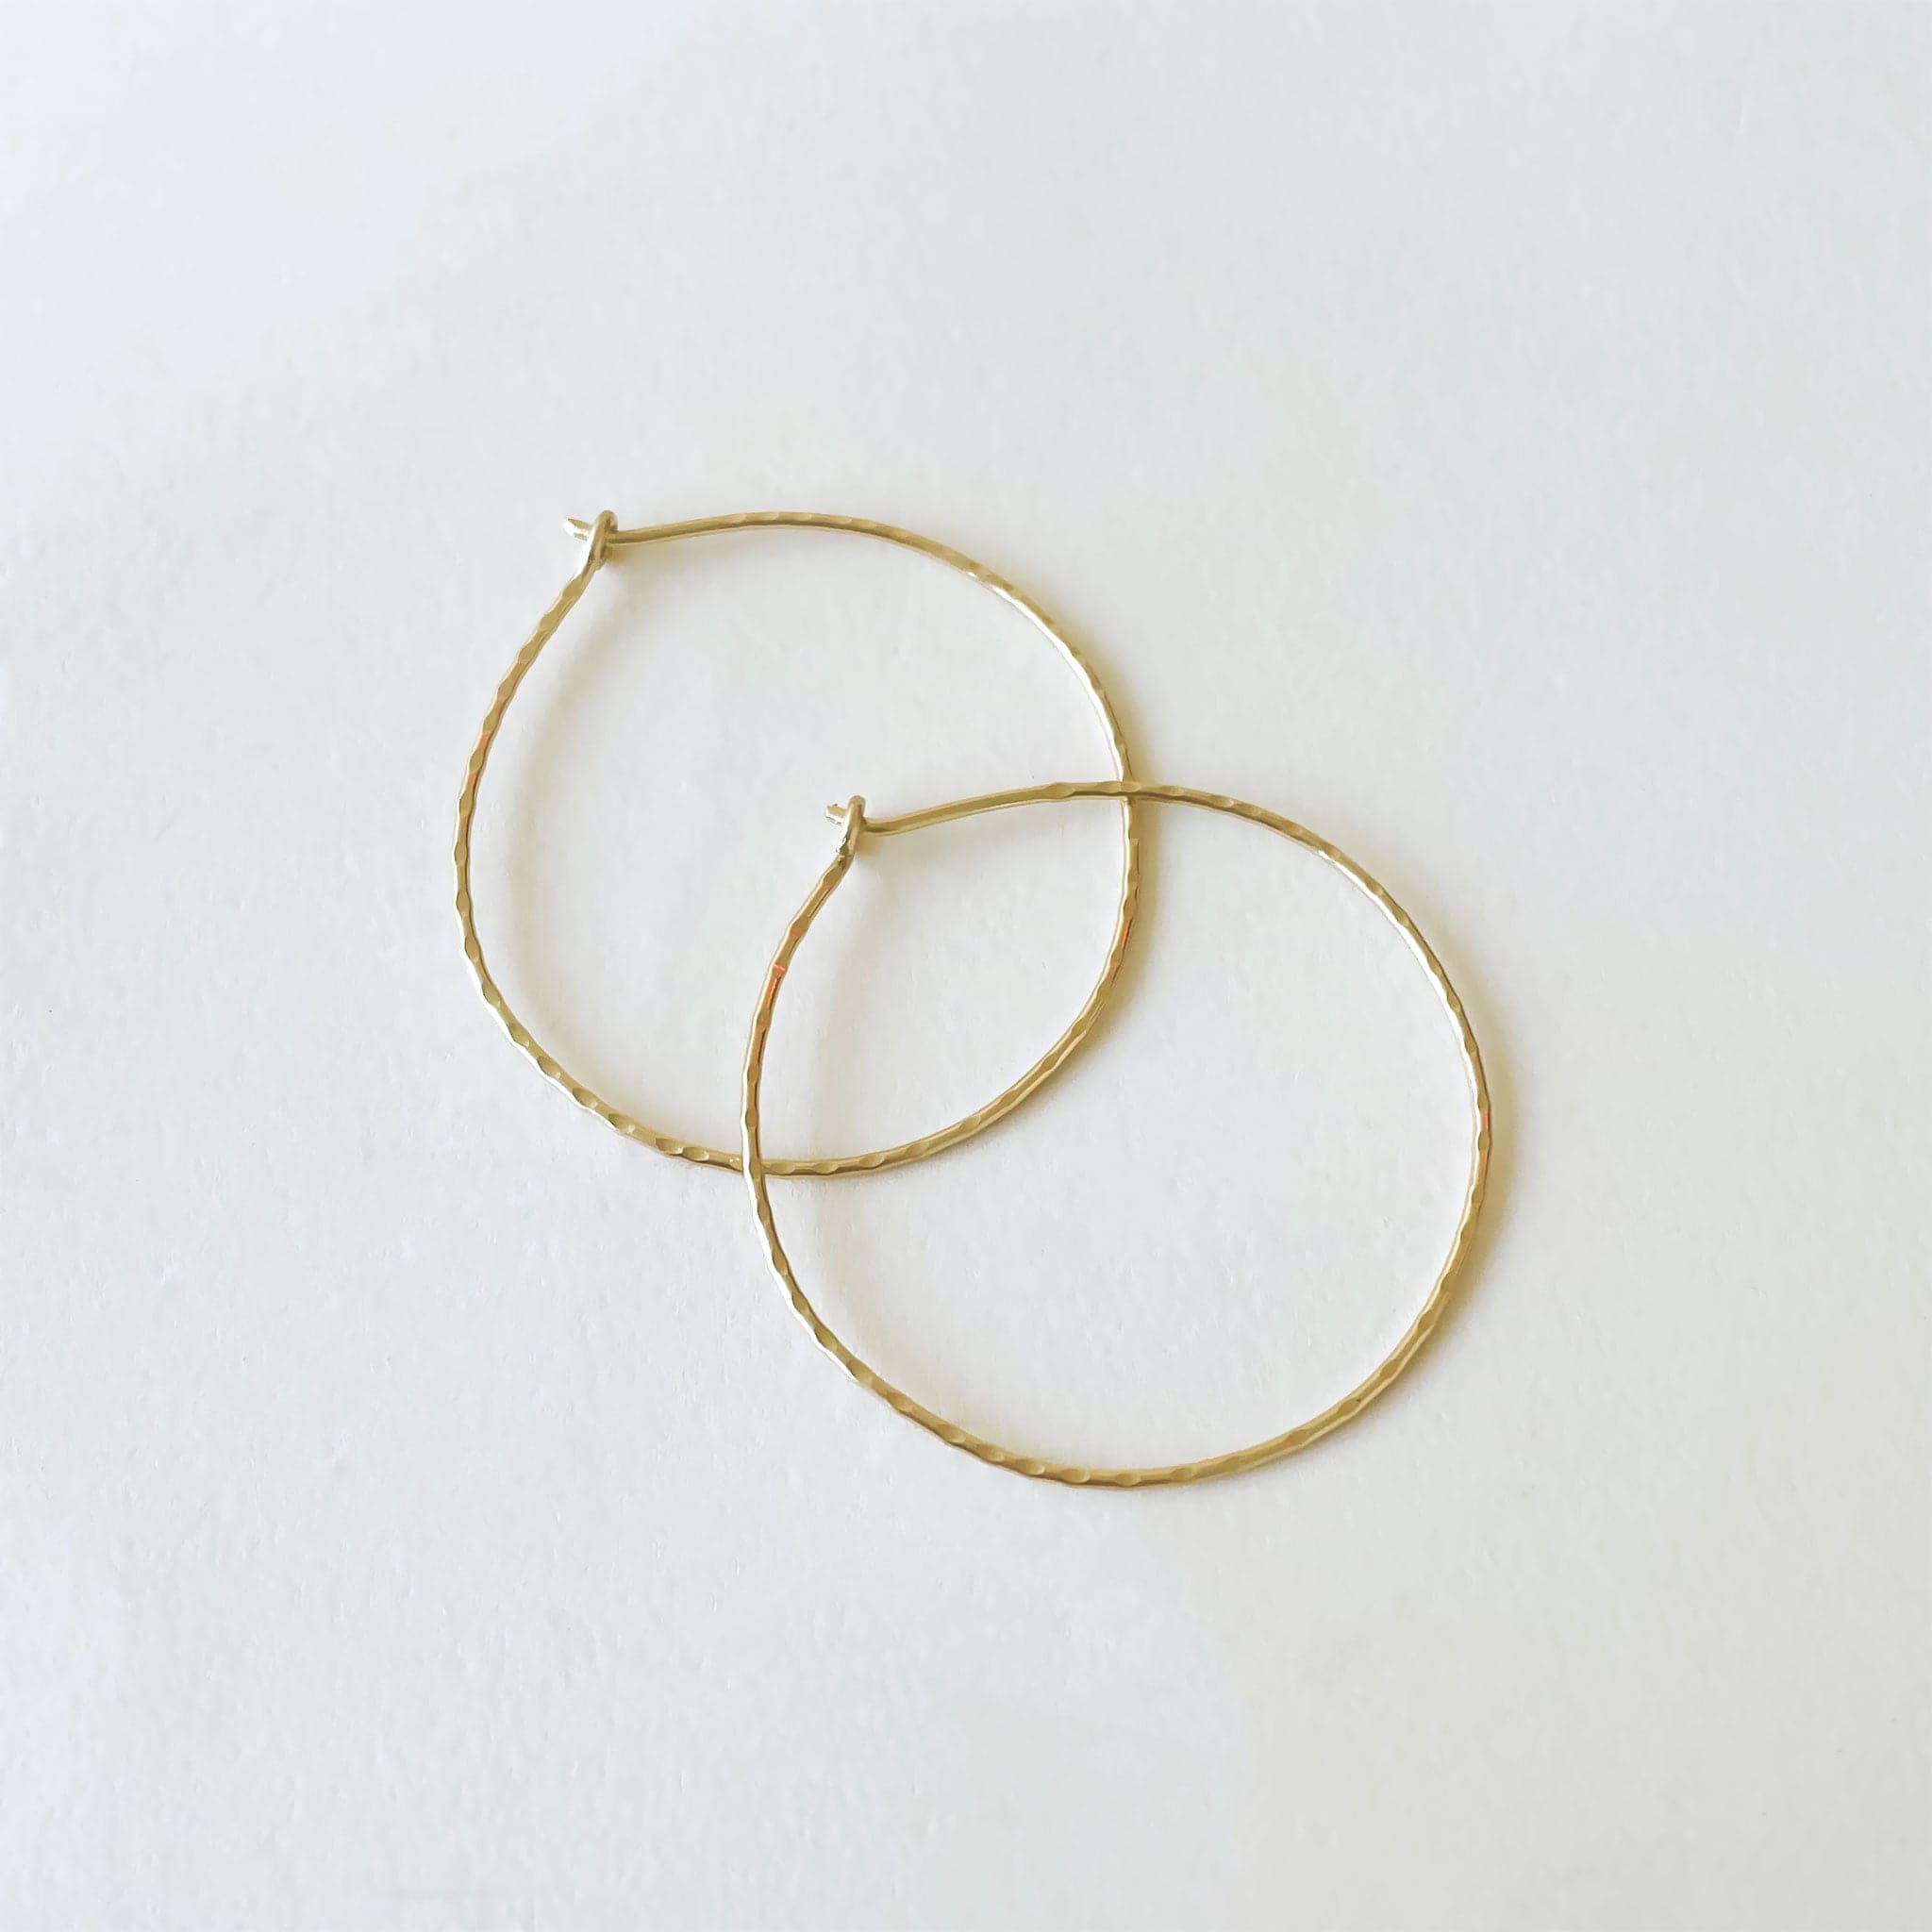 The largest option of hammered 14k hoops.